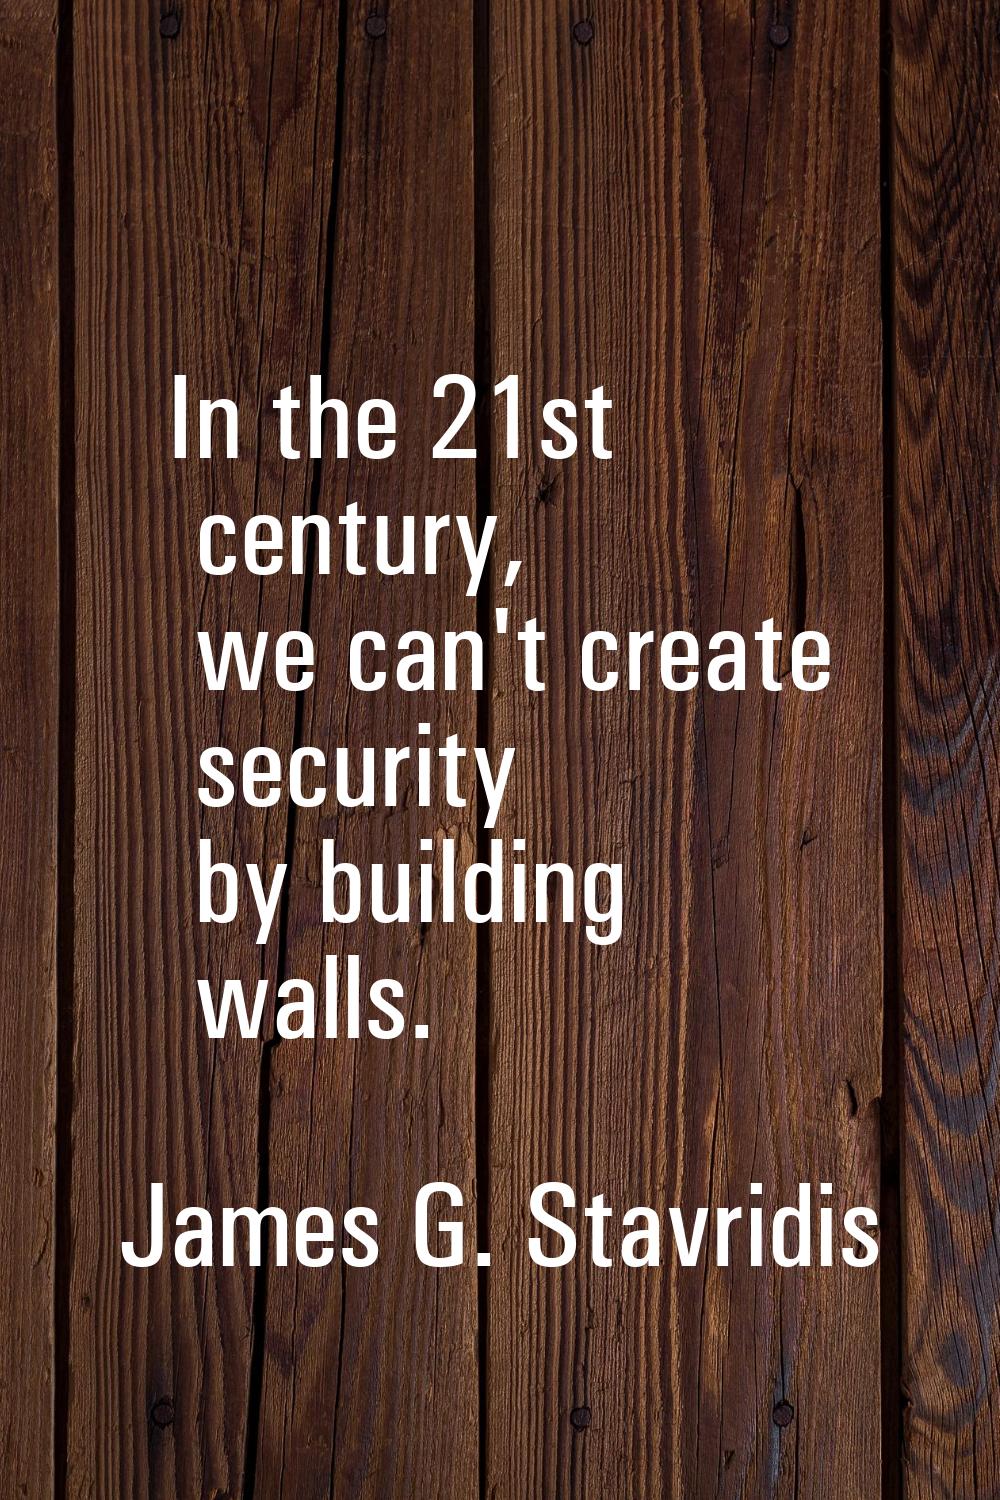 In the 21st century, we can't create security by building walls.